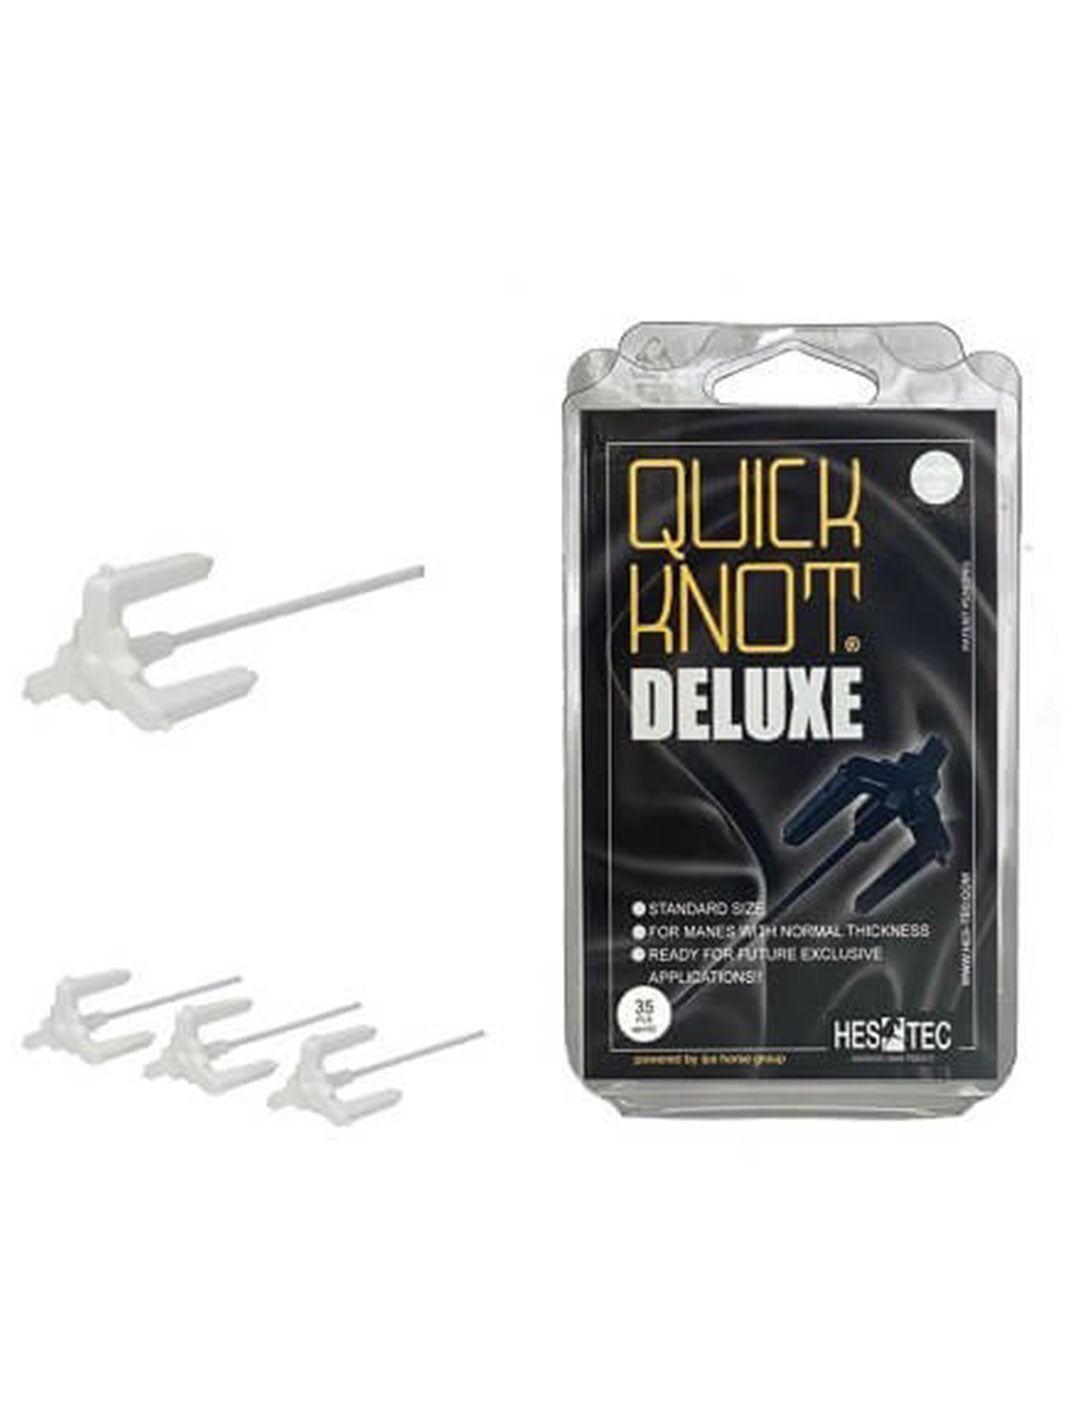 Quick Knot Deluxe®